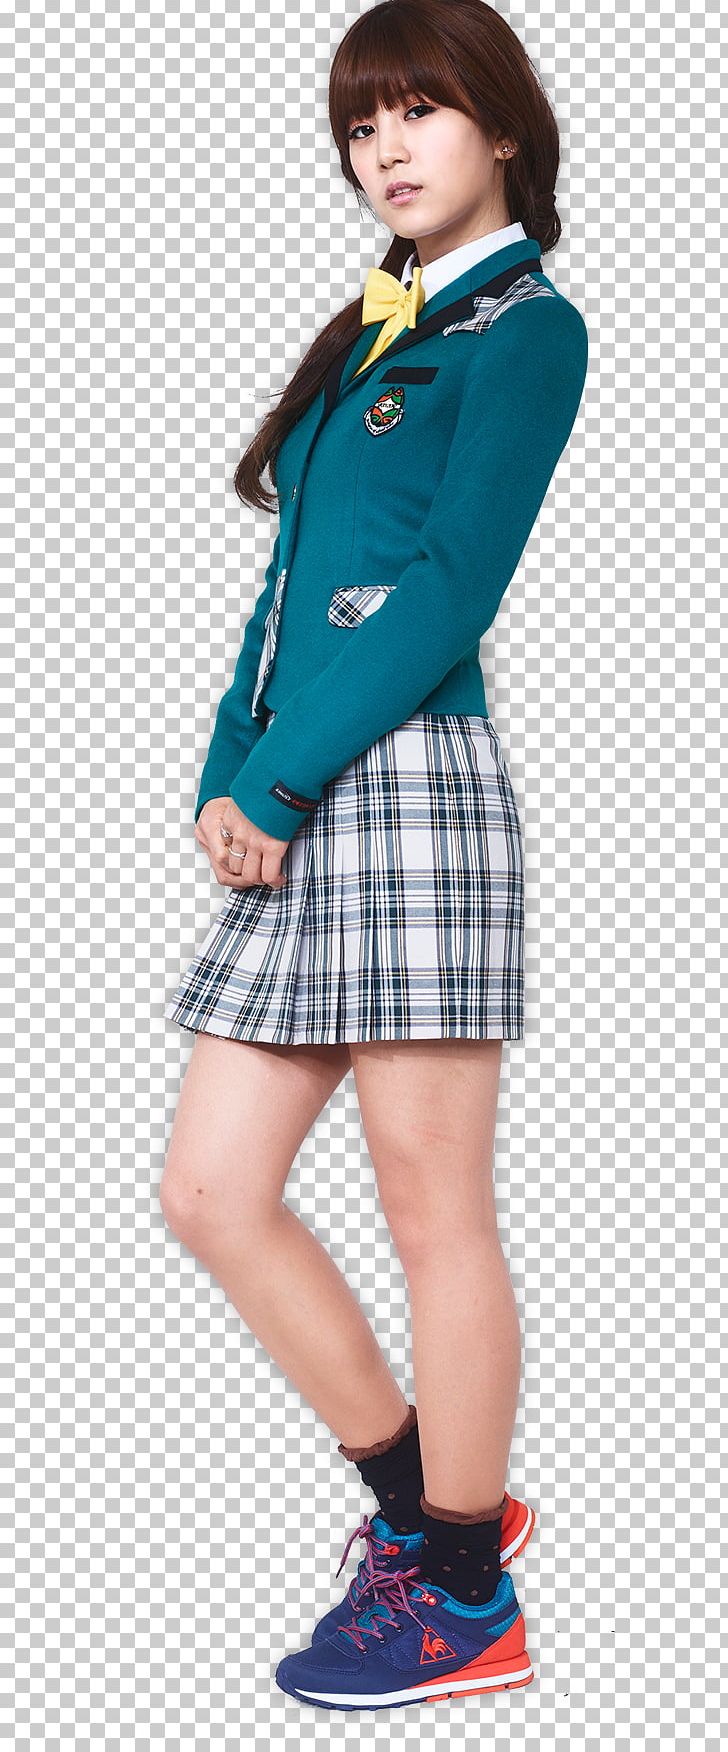 Park Cho-rong School Uniform Apink PNG, Clipart, Apink, Blue, Child, Child Model, Clothing Free PNG Download